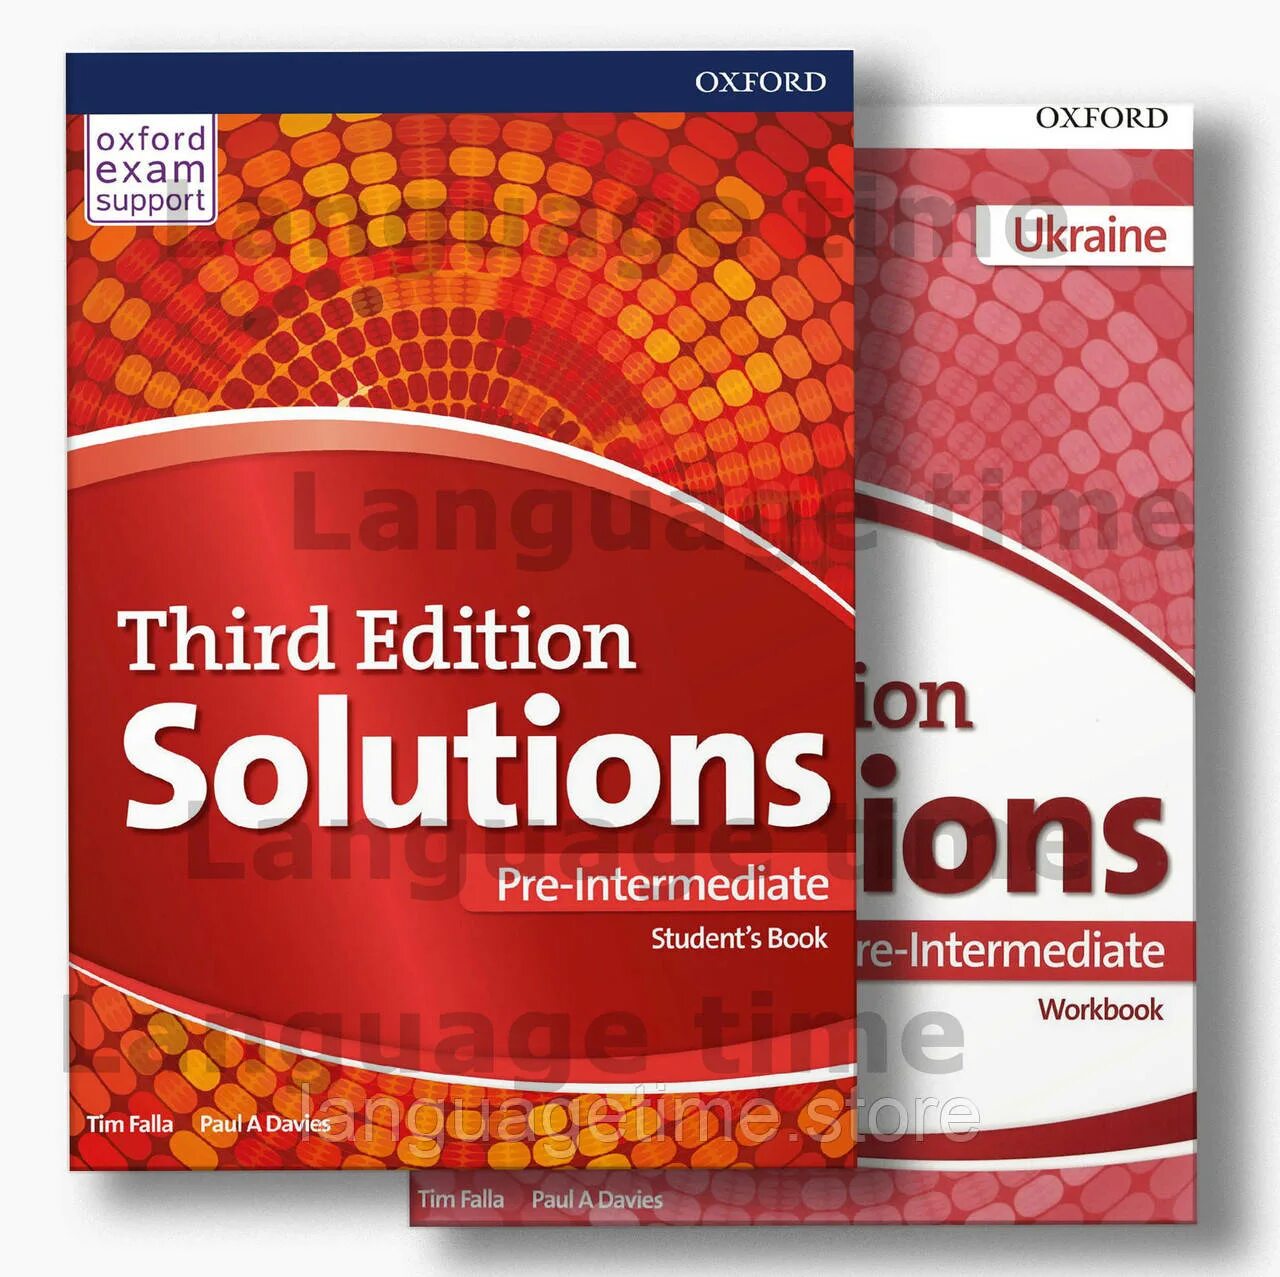 Solutions pre intermediate 3rd edition students book. Solutions pre-Intermediate 3rd Edition Workbook. Third solution pre Intermediate. Солюшн пре иньармедимент 3 издание. Third Edition solutions pre Intermediate Workbook.